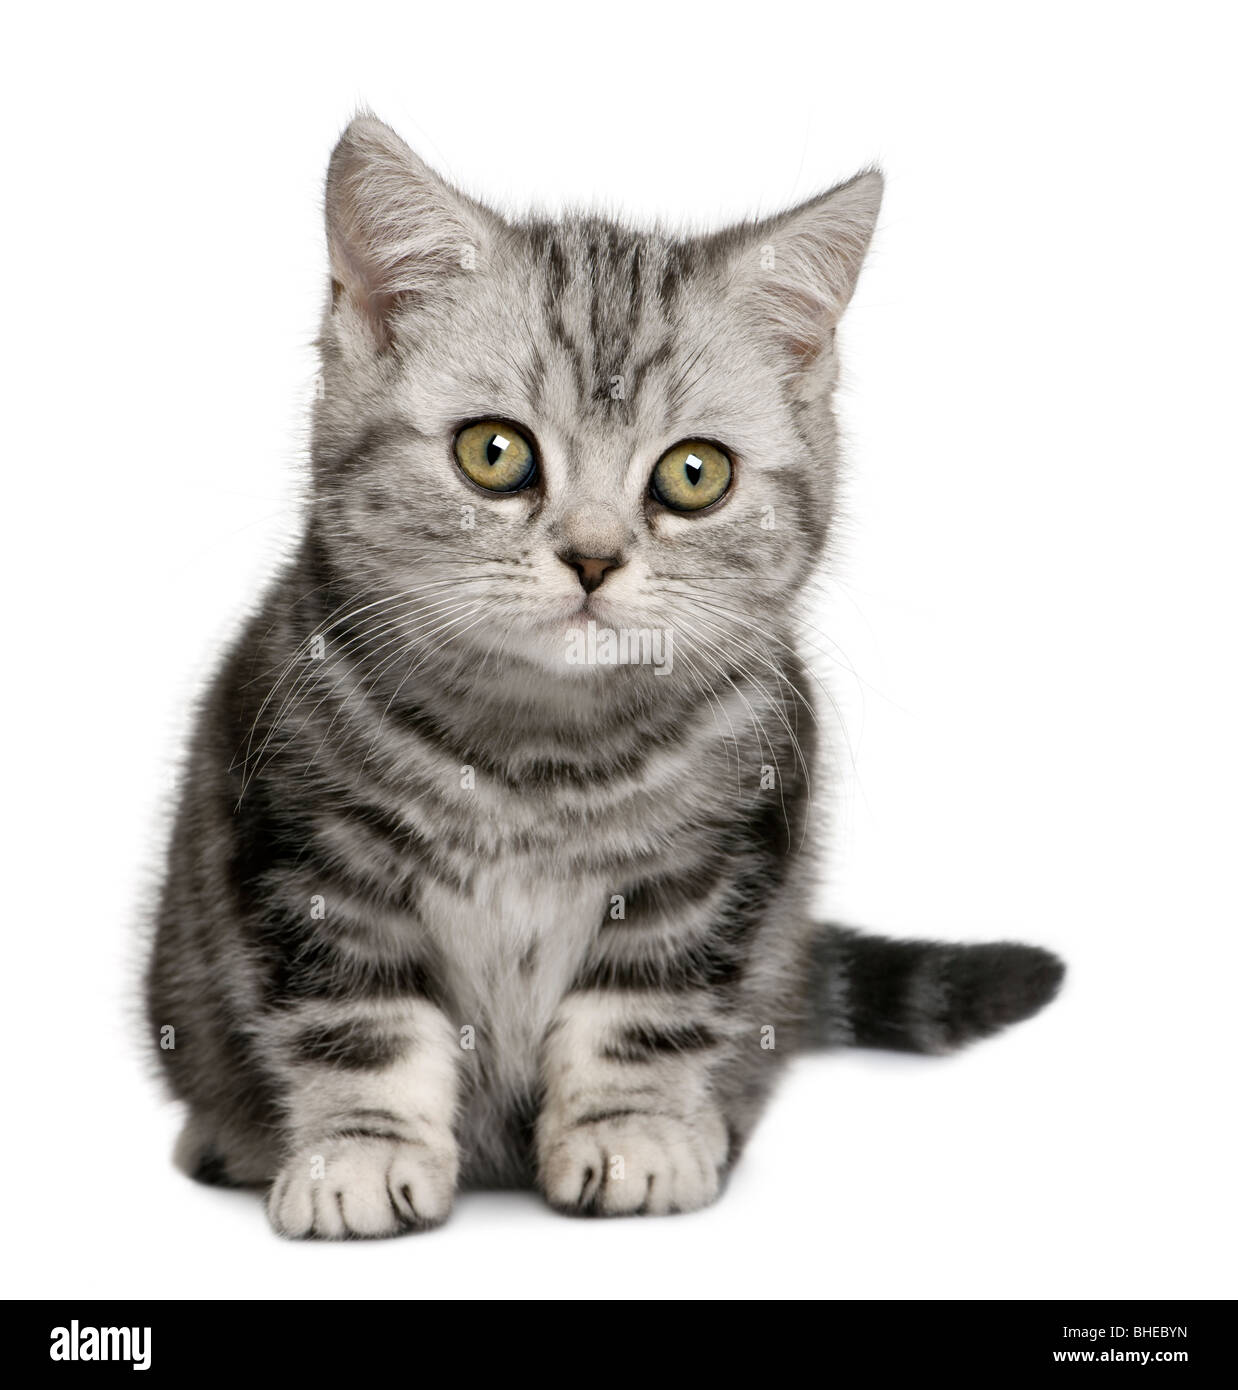 British Shorthair kitten, 10 months old, in front of a white background Stock Photo